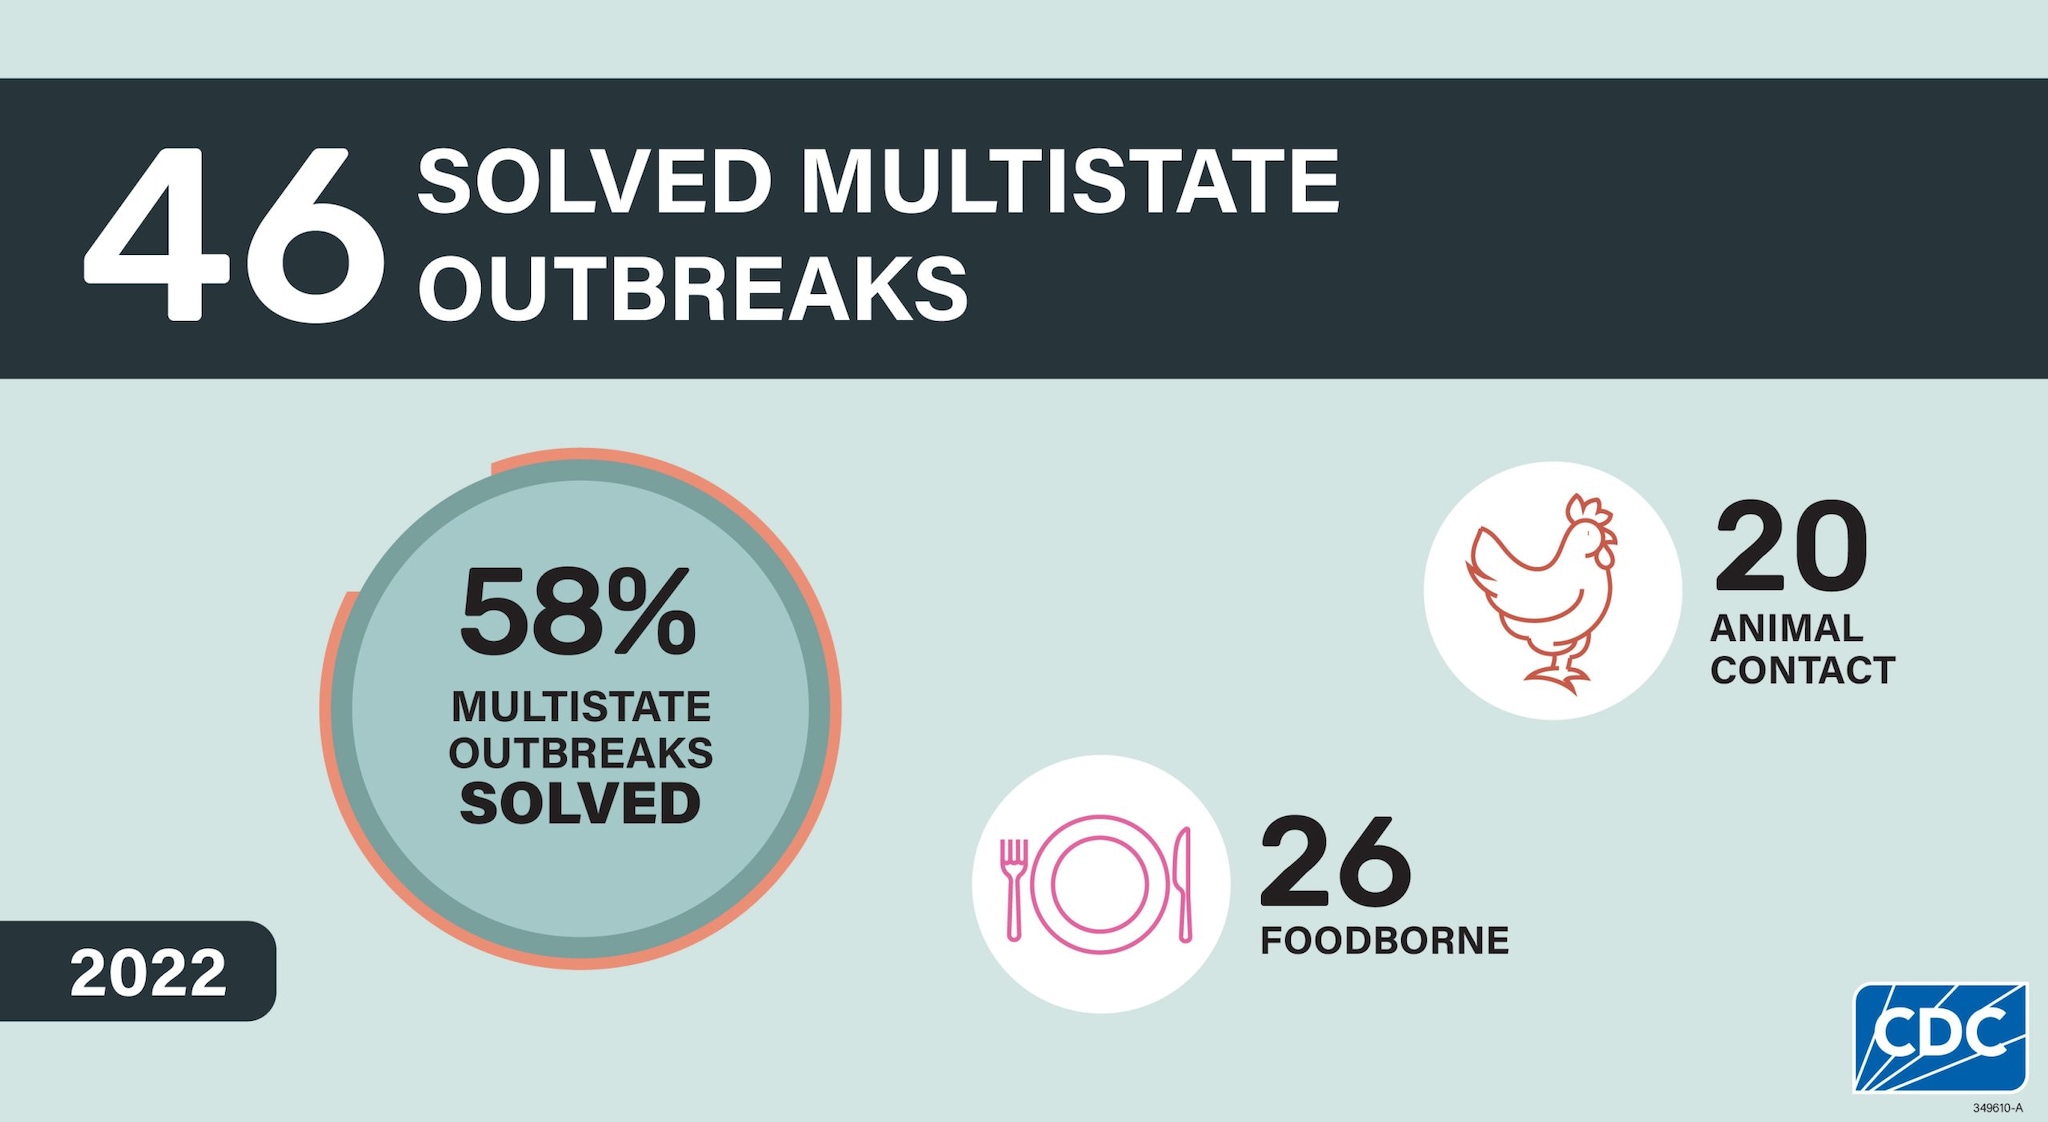 46 solved multistate outbreaks: 58% multistate outbreaks solved; 26 foodborne and 20 animal contact